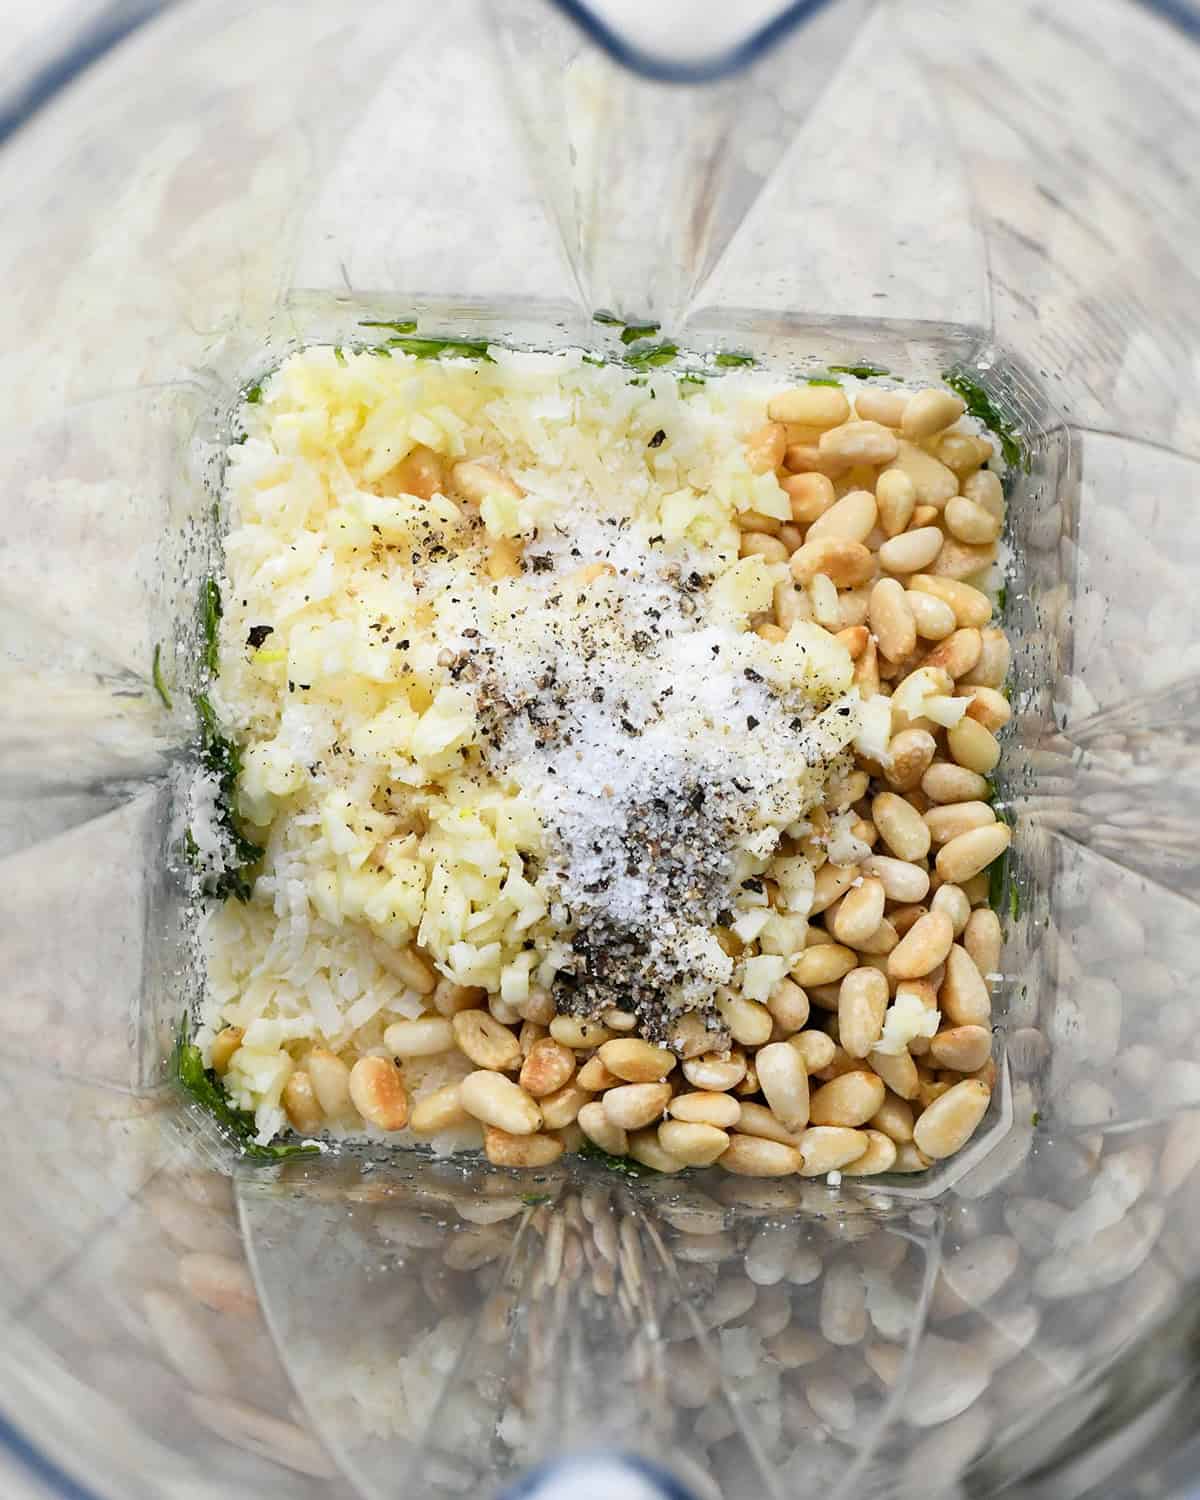 How to Make Pesto Sauce - pine nuts, parmesan cheese, salt and pepper added to the basil in a blending container before blending